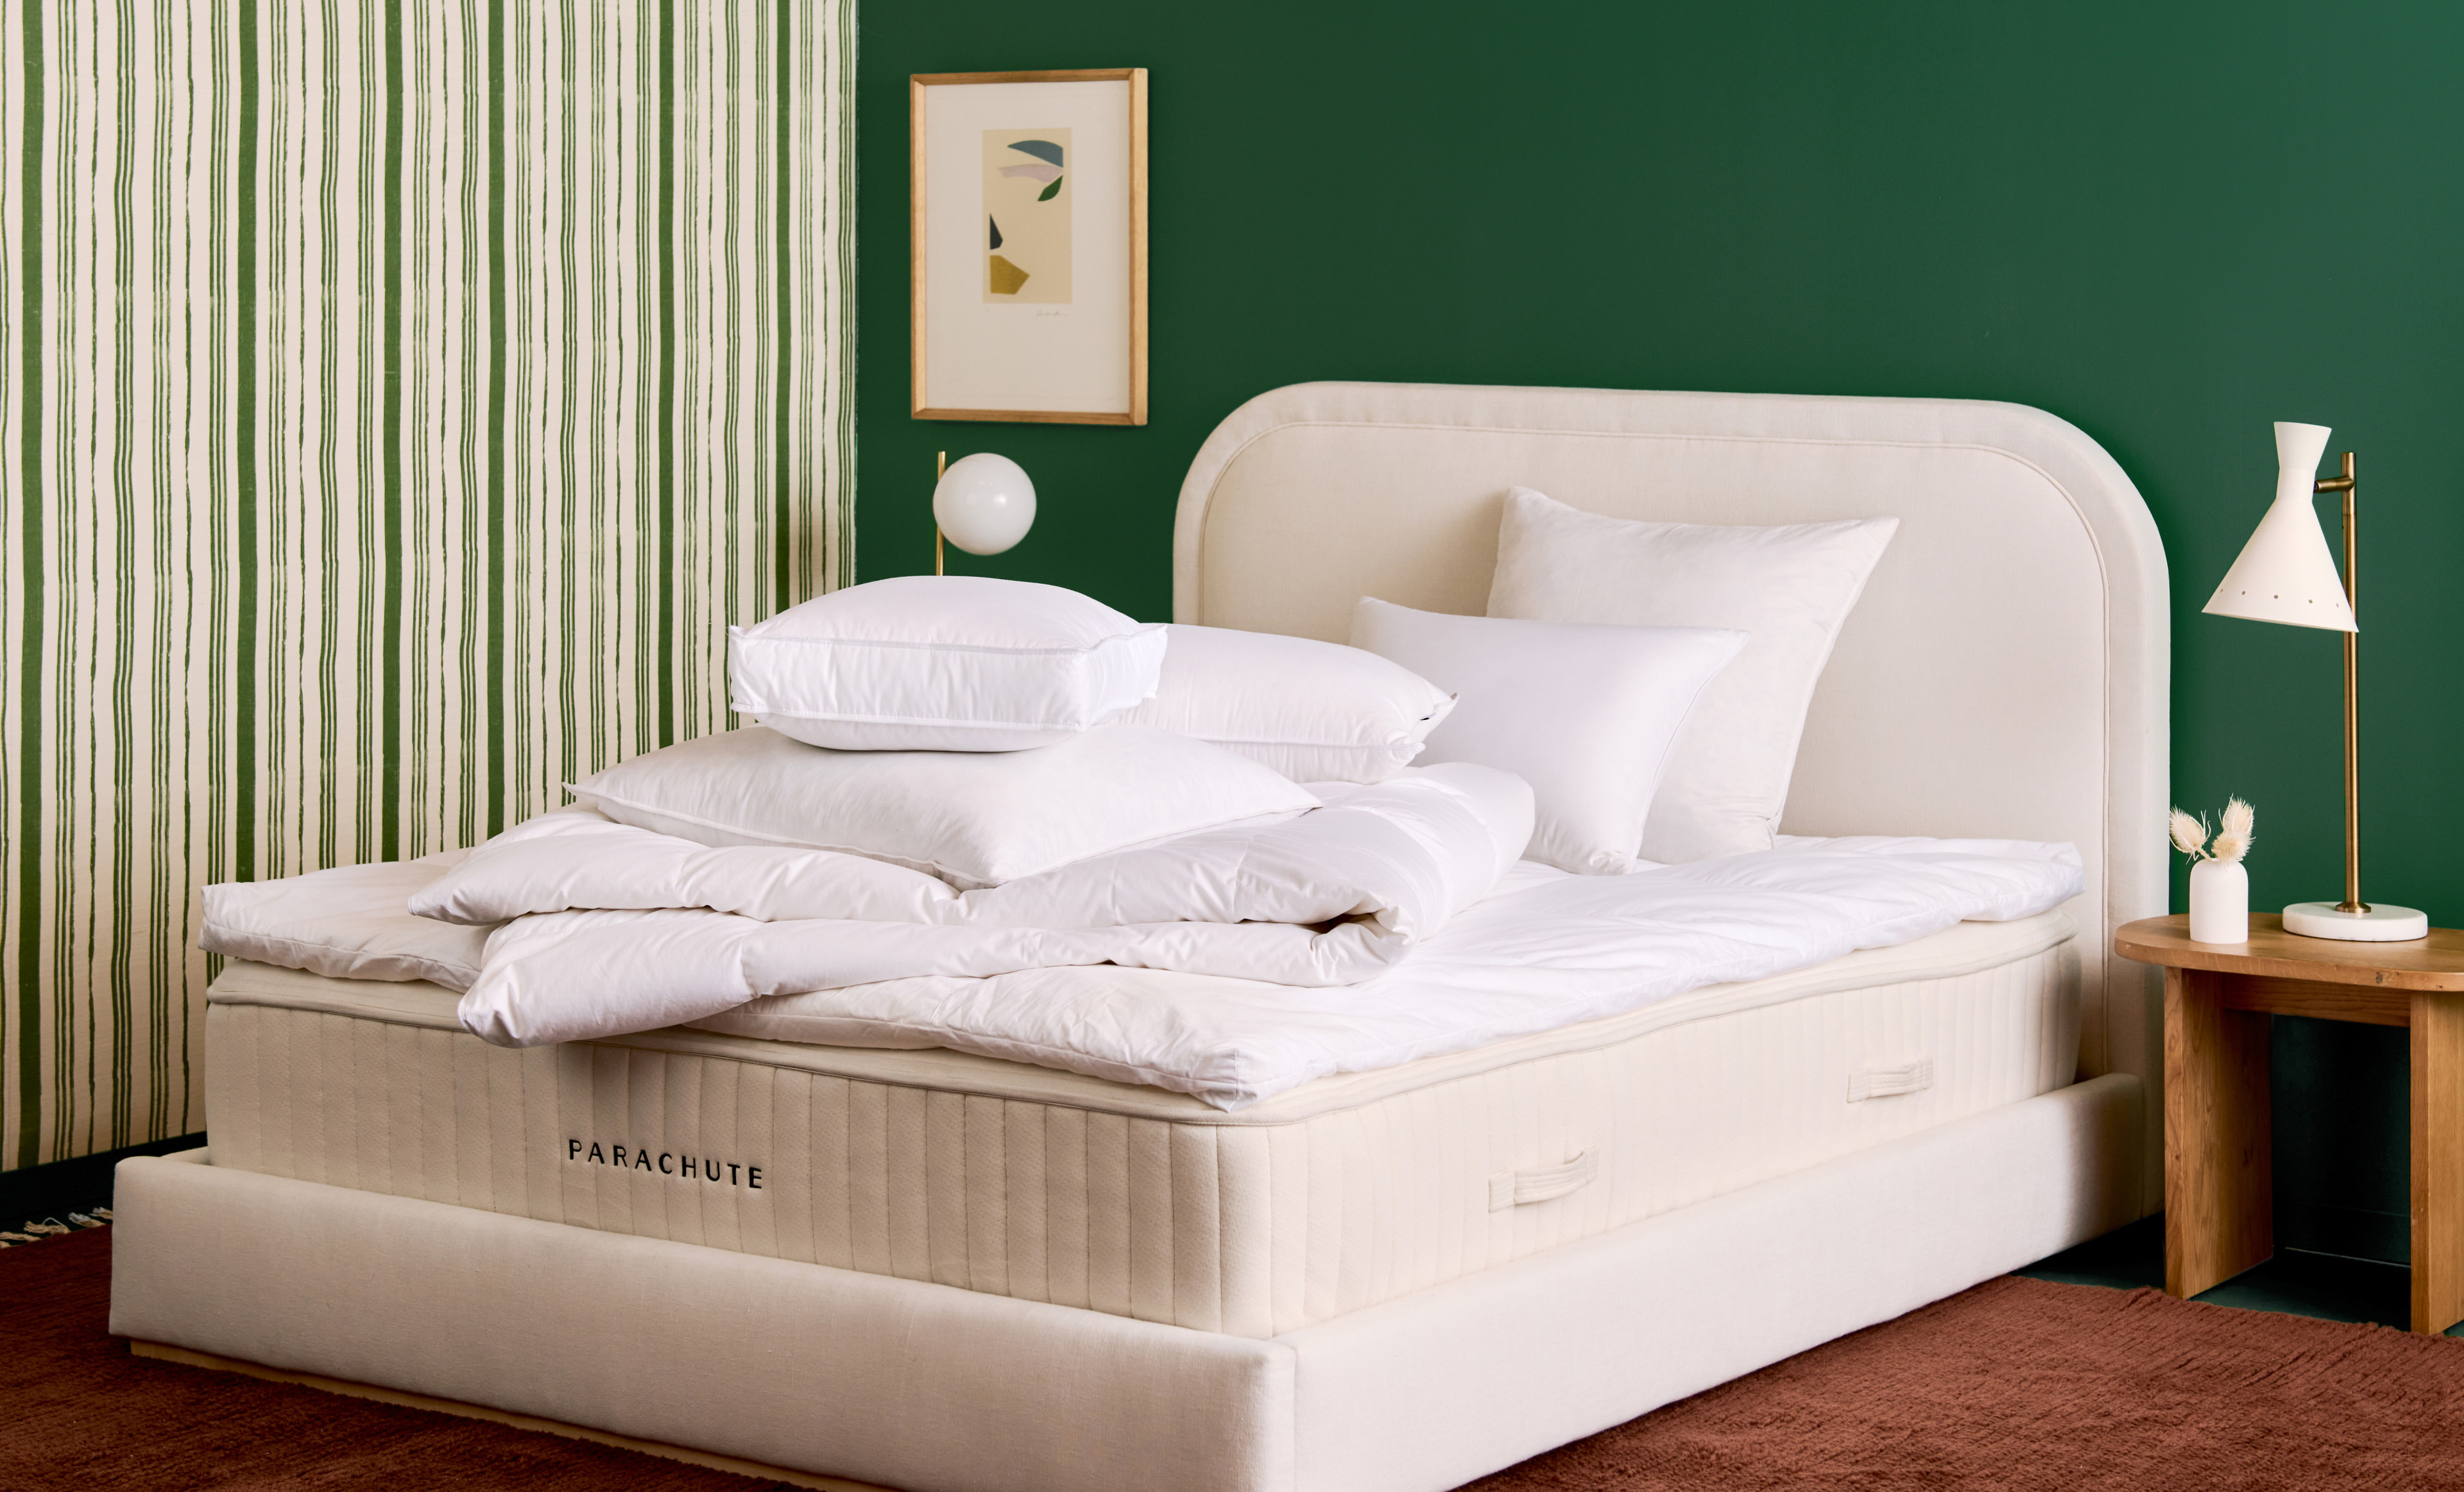 Bare mattress with bare pillows and bedding inserts against a green wall